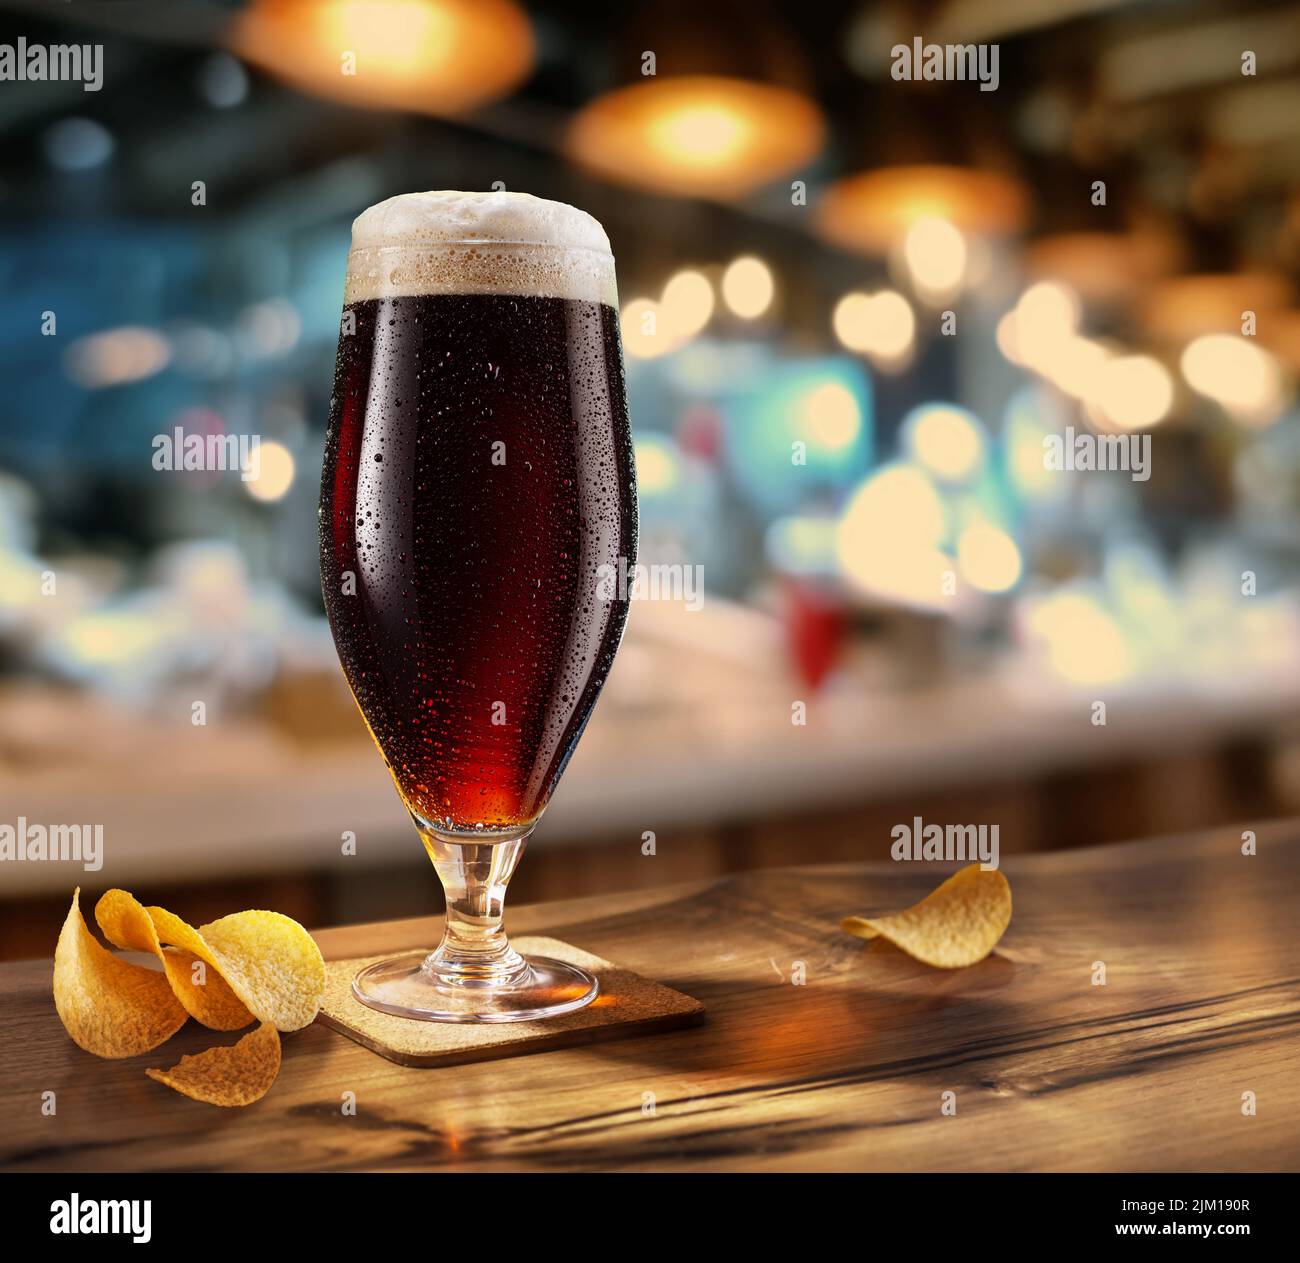 Cooled glass of dark beer on the wooden table. Blurred pub interior at the background. Stock Photo